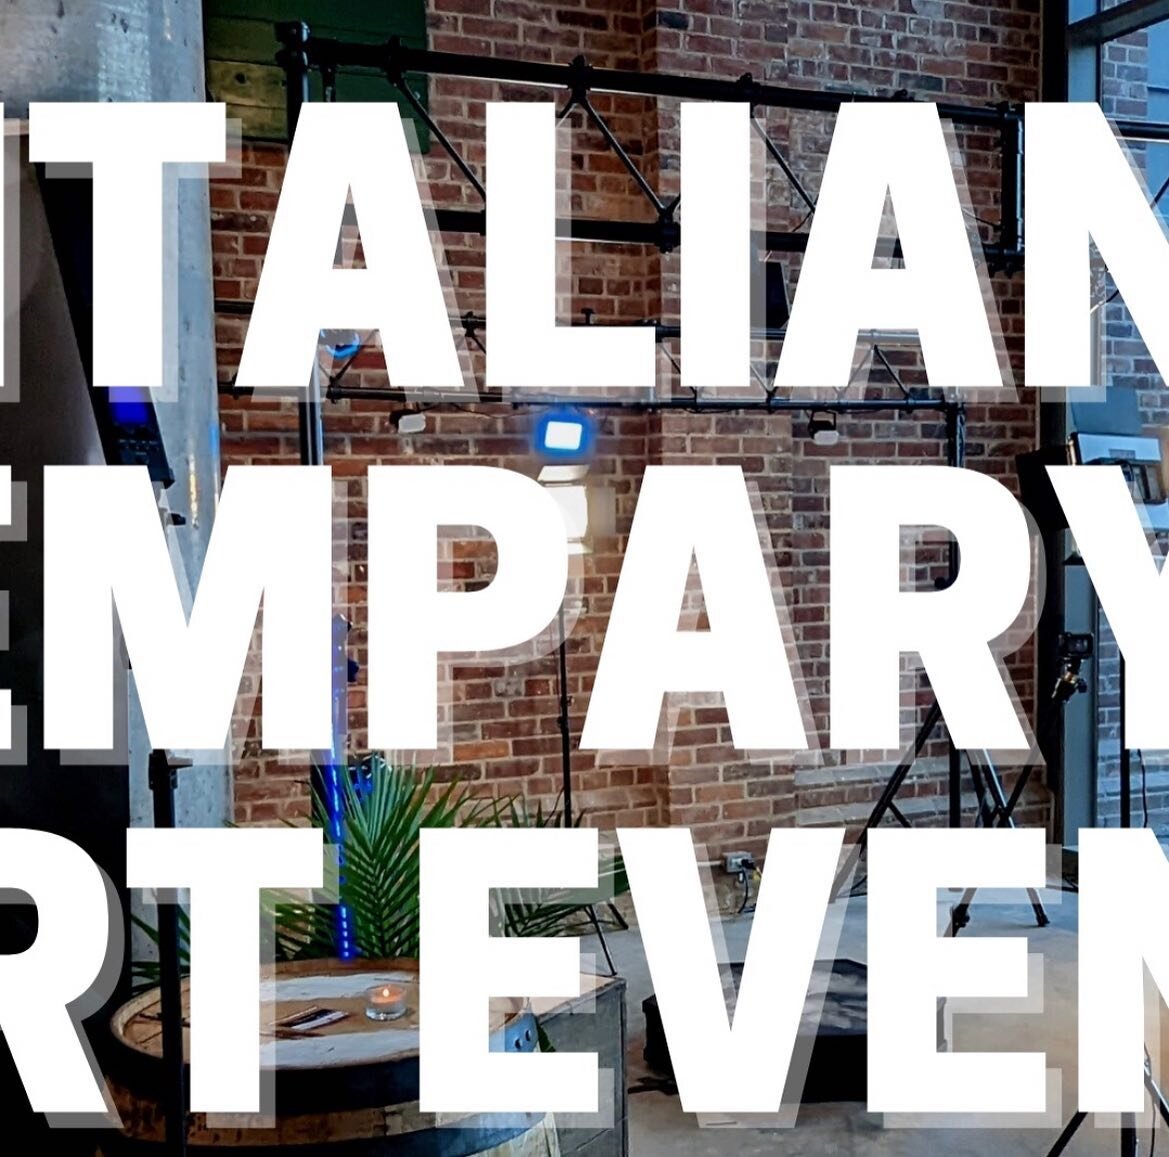 Next up on our events to show off is the art gallery event held during the @icffcanada in @distilleryto 🎨🎭📸
.
.
.

 #luxuryphoto #photobooth #photoboothexperience #torontophotobooth #photoboothcompany #photoexperience #photoinspo #torontowedding #